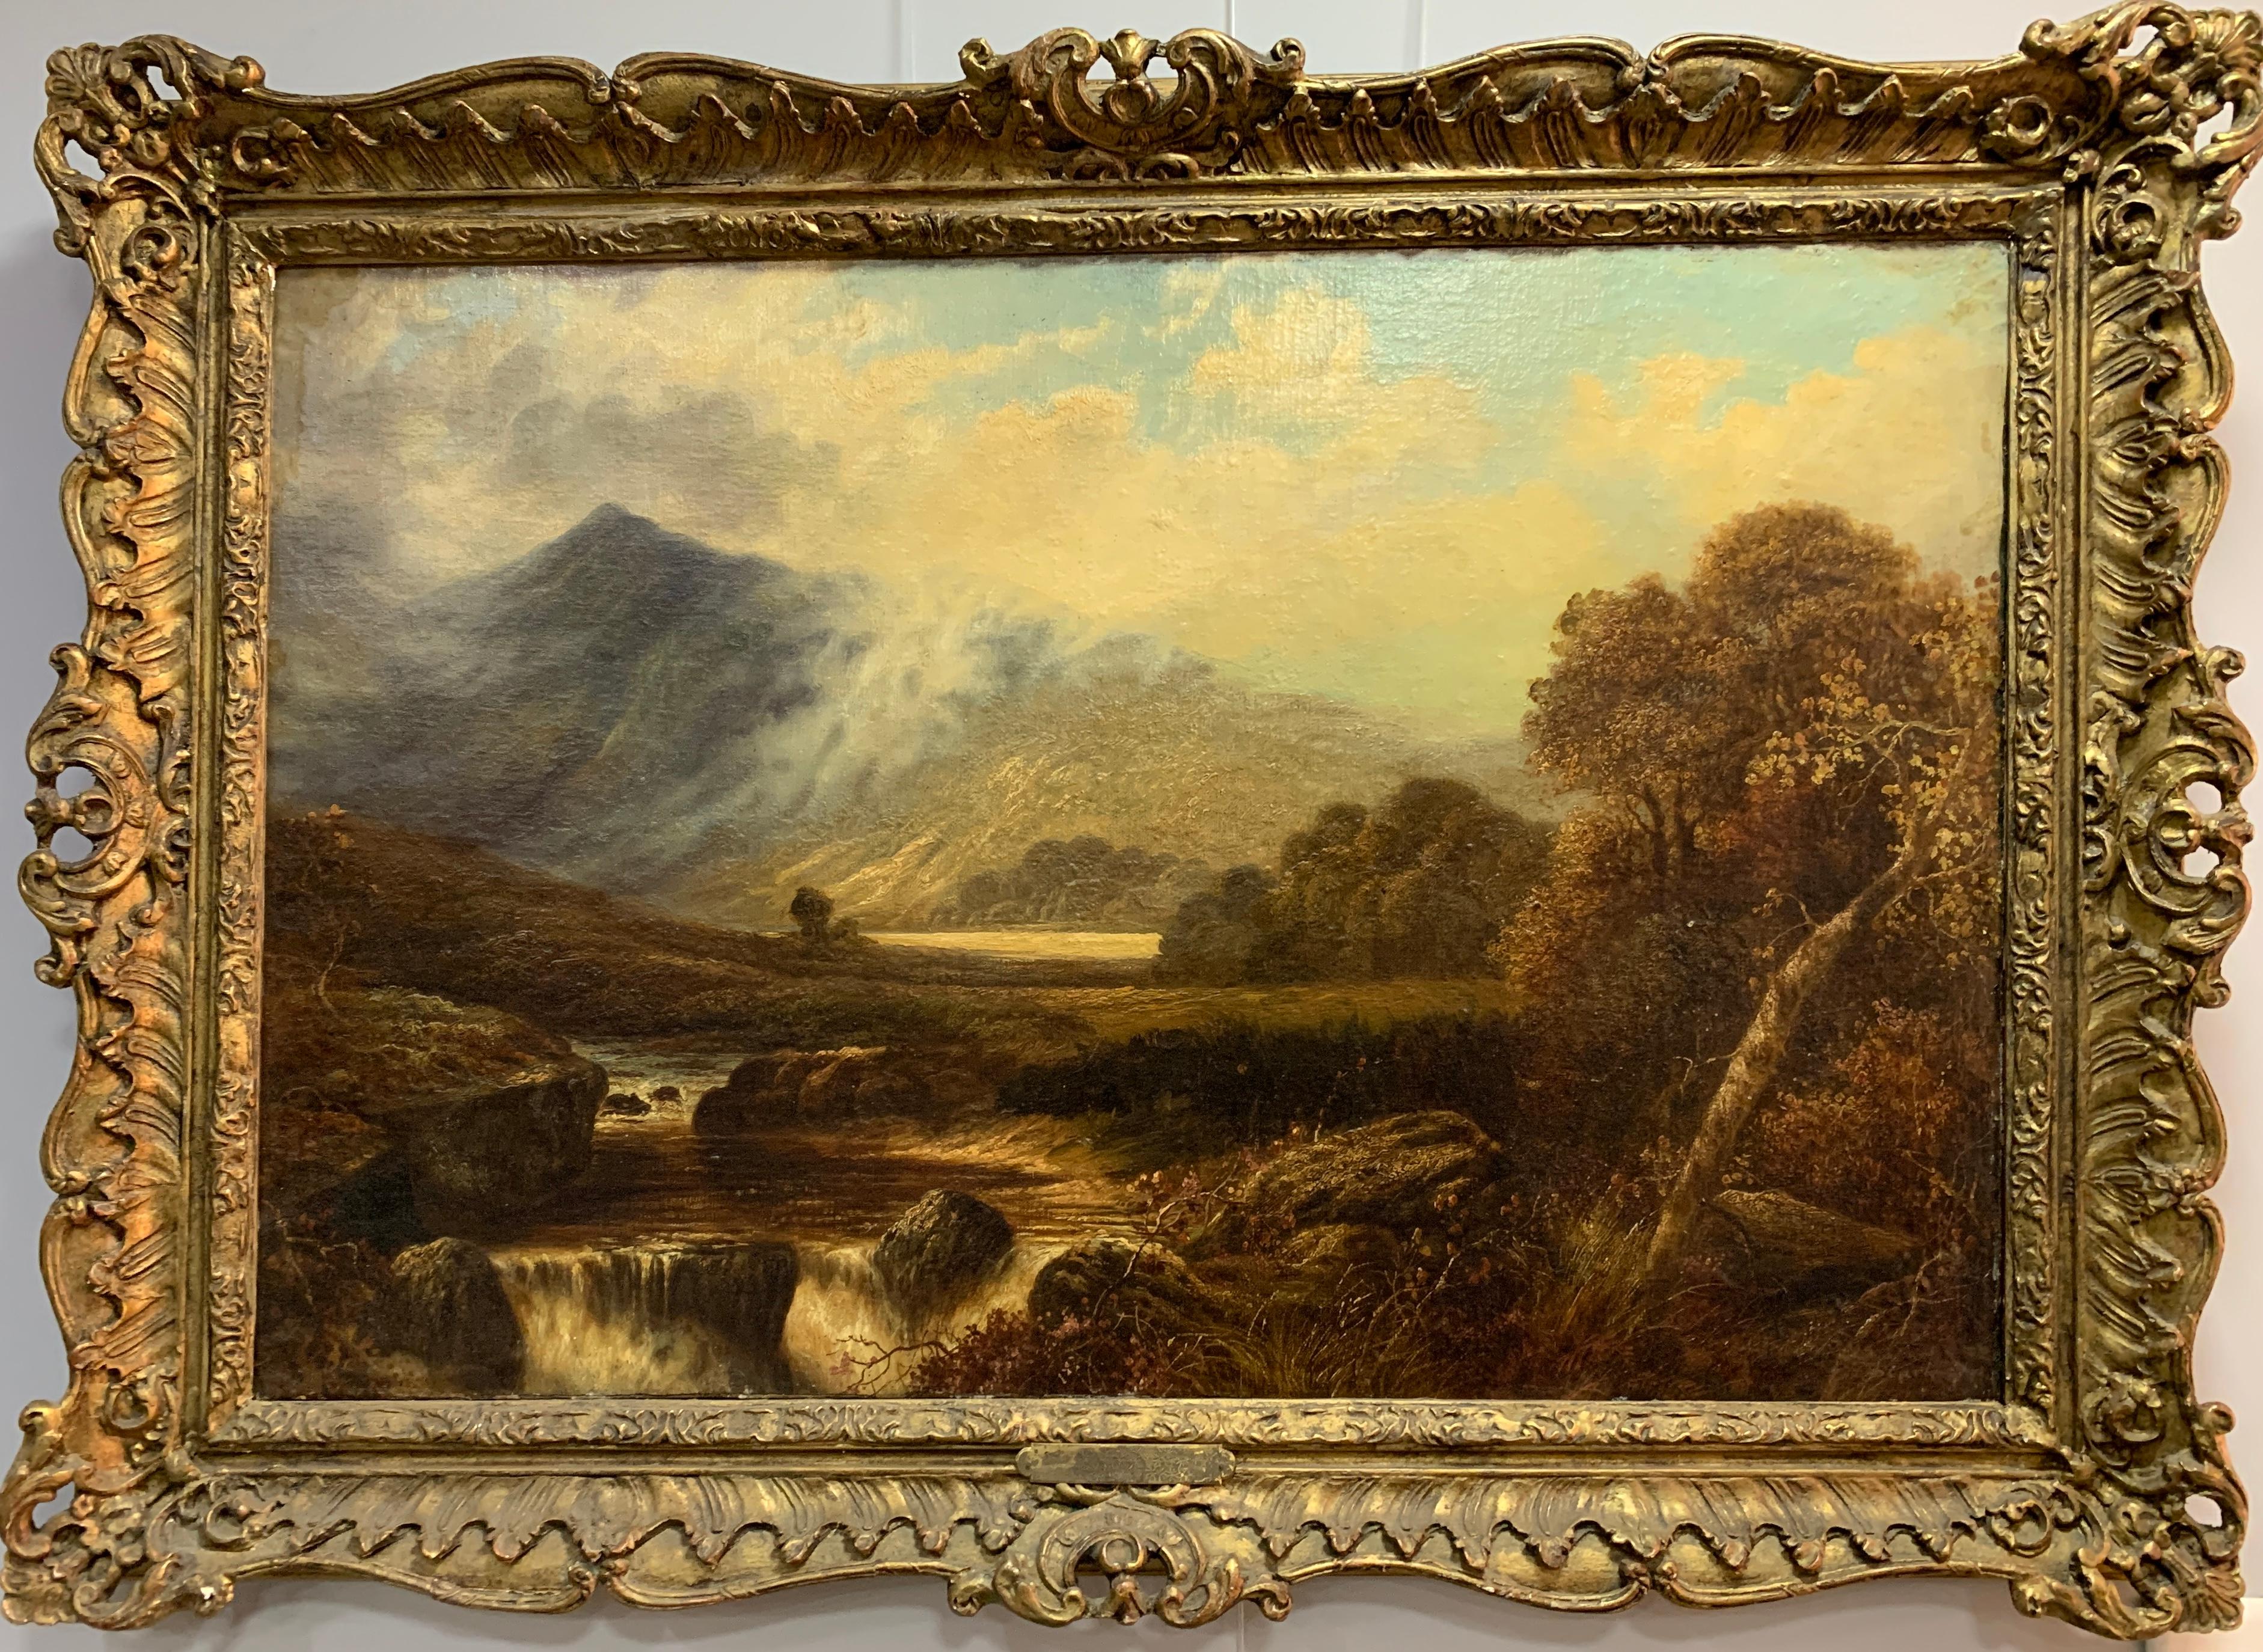 Fine 19th century English oil painting on canvas, within the original ornate giltwood frame. Depicting foggy mountain landscape with a forest and stream with waterfalls.

Circle of James Stark (1794-1859)

Signed lower right: J.